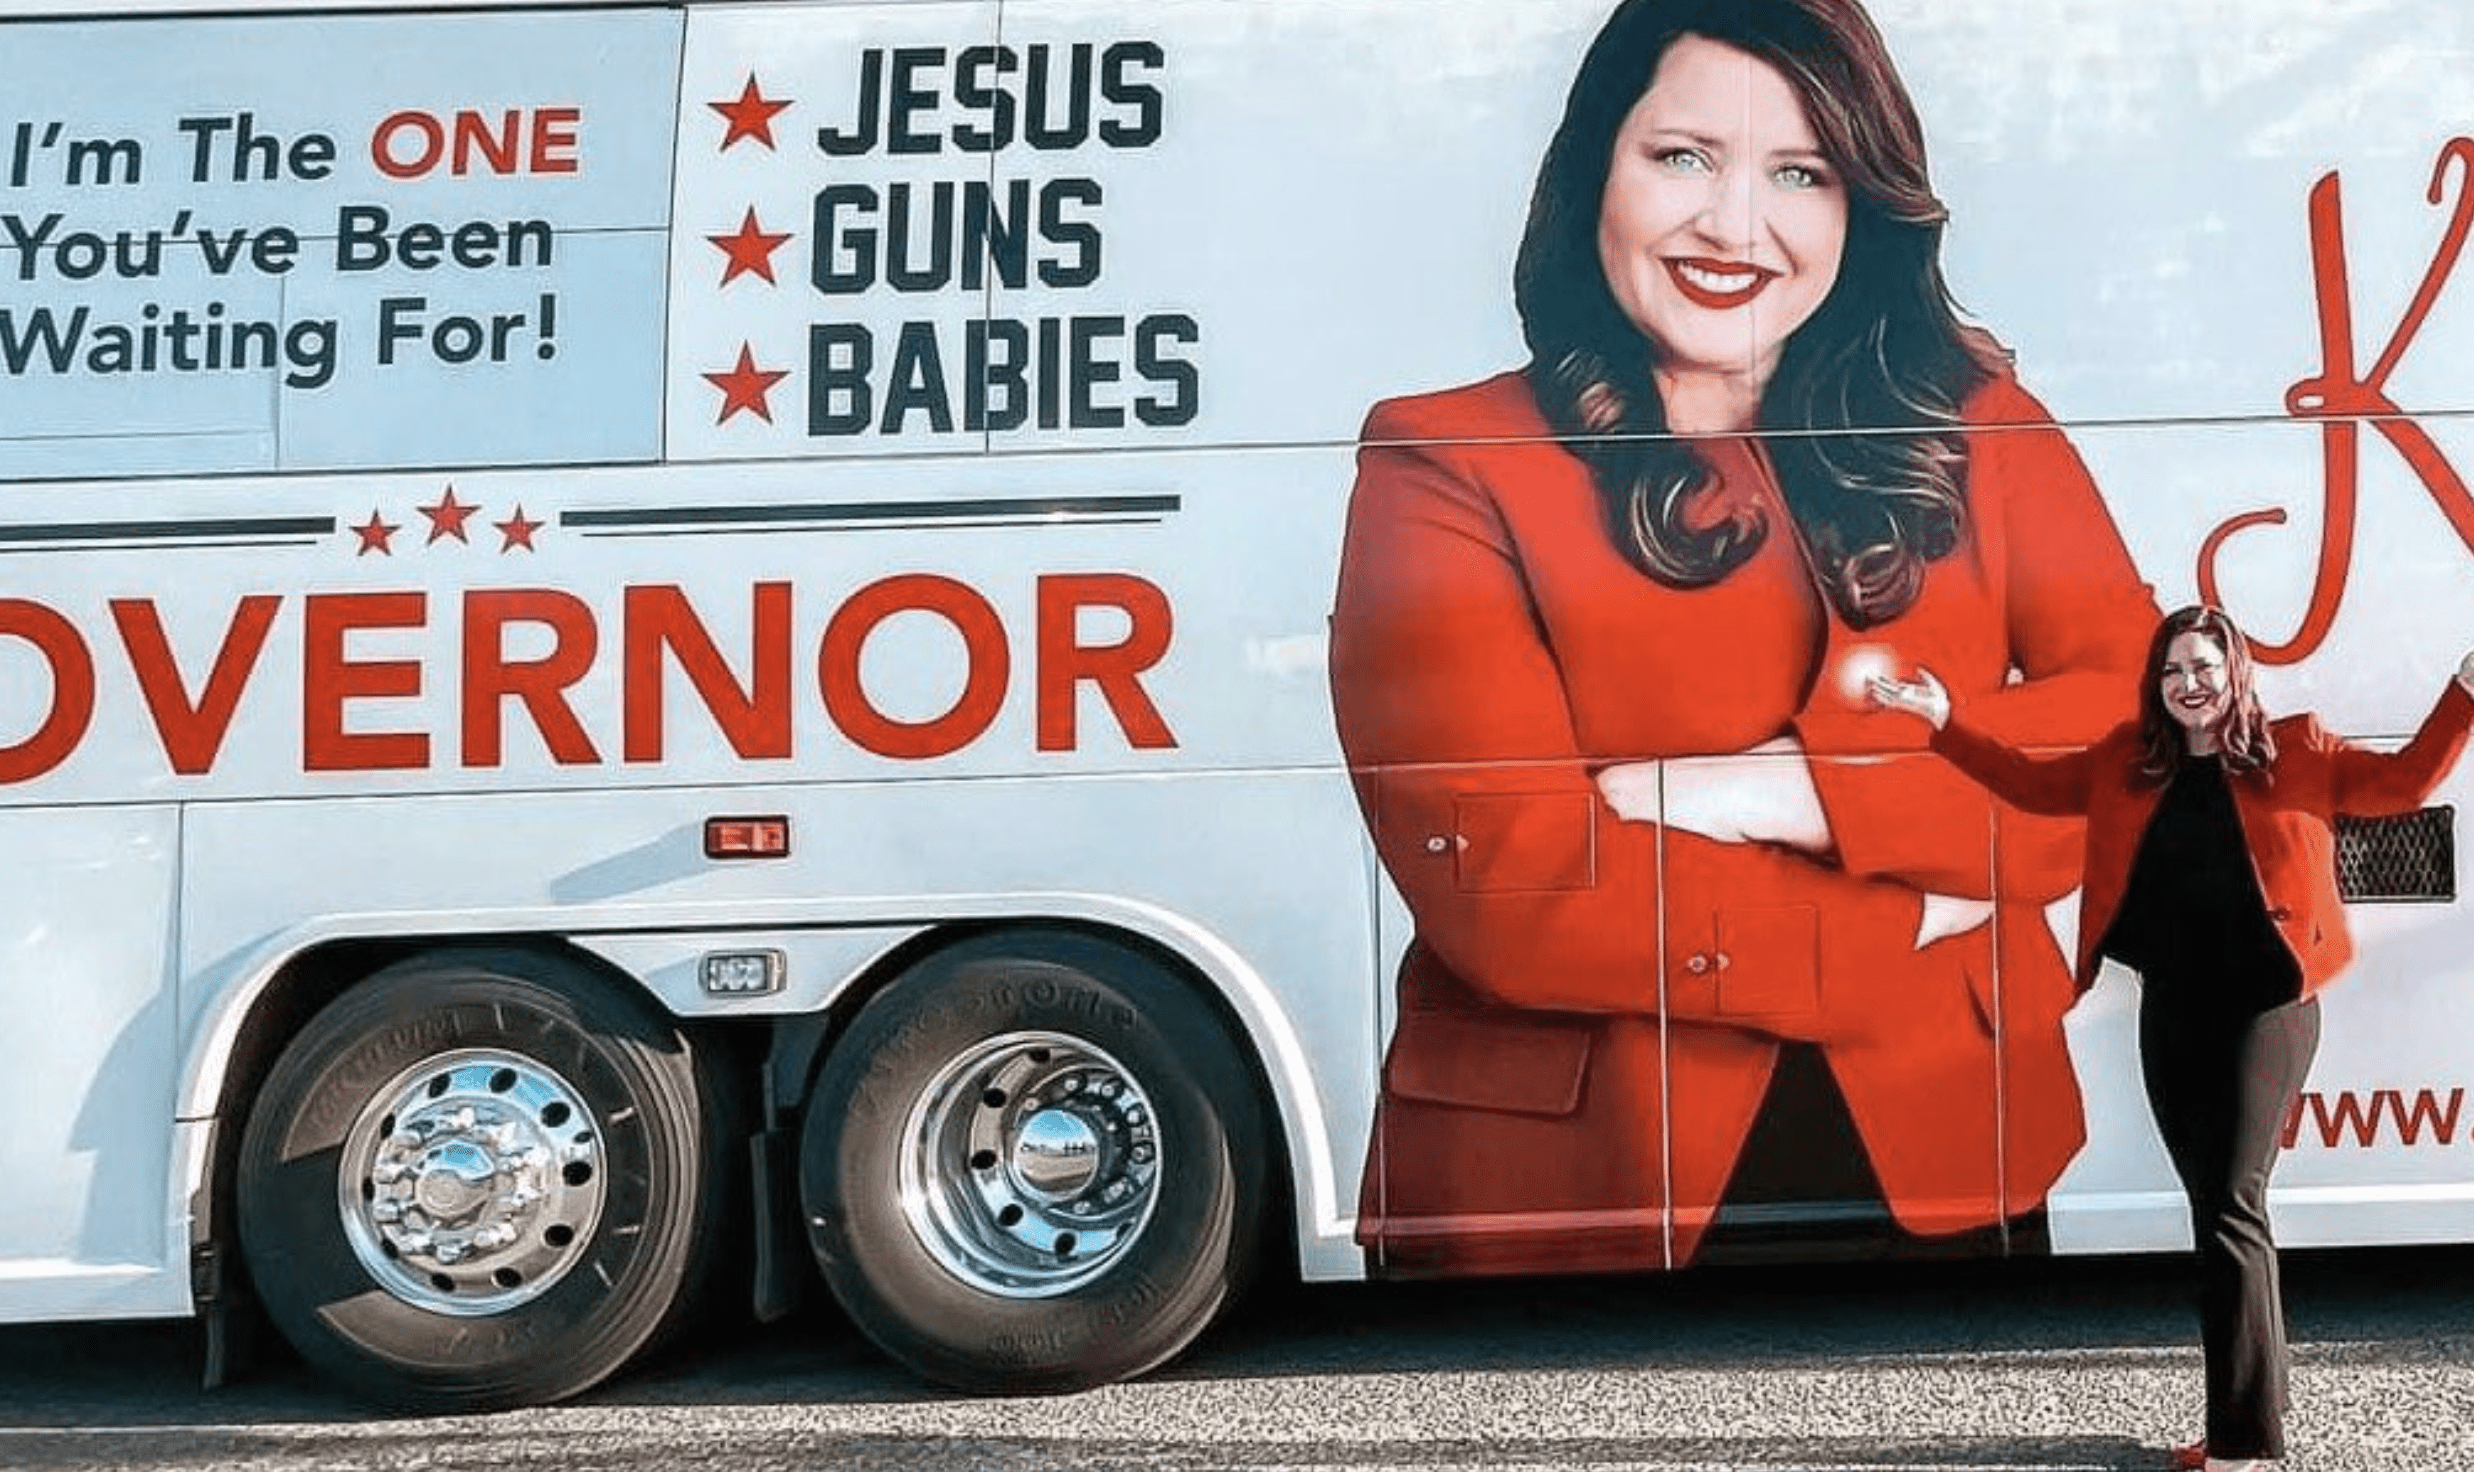 Republican lampooned for ‘Jesus, Guns, Babies’ slogan on bus